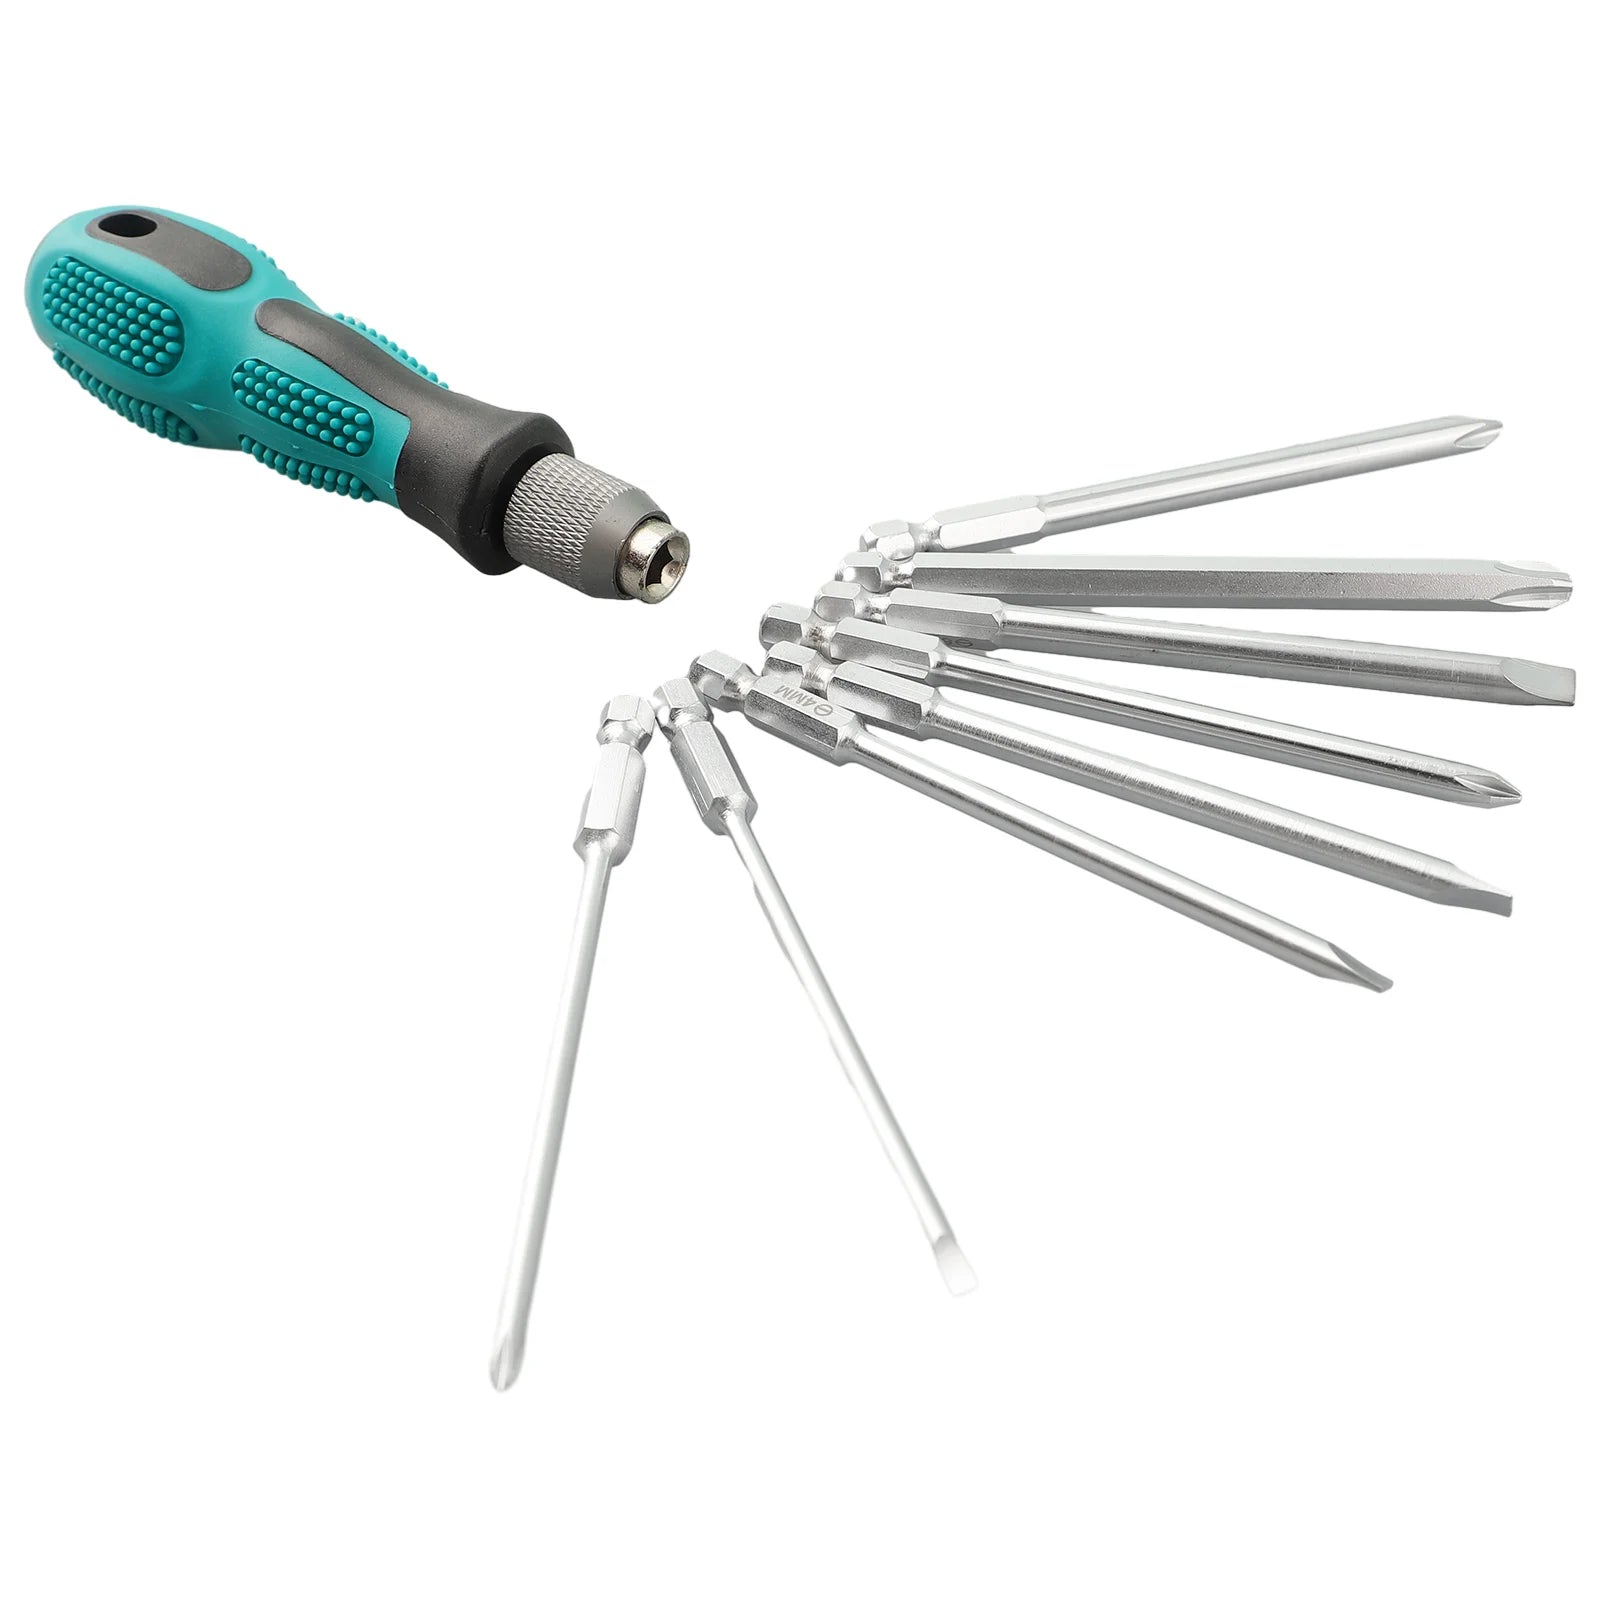 1pc Screwdriver Handle With 4pcs Cross Screwdriver 4pcs Slotted Screwdriver 8 In1 Screw Driver Multi Repair Hand Tools